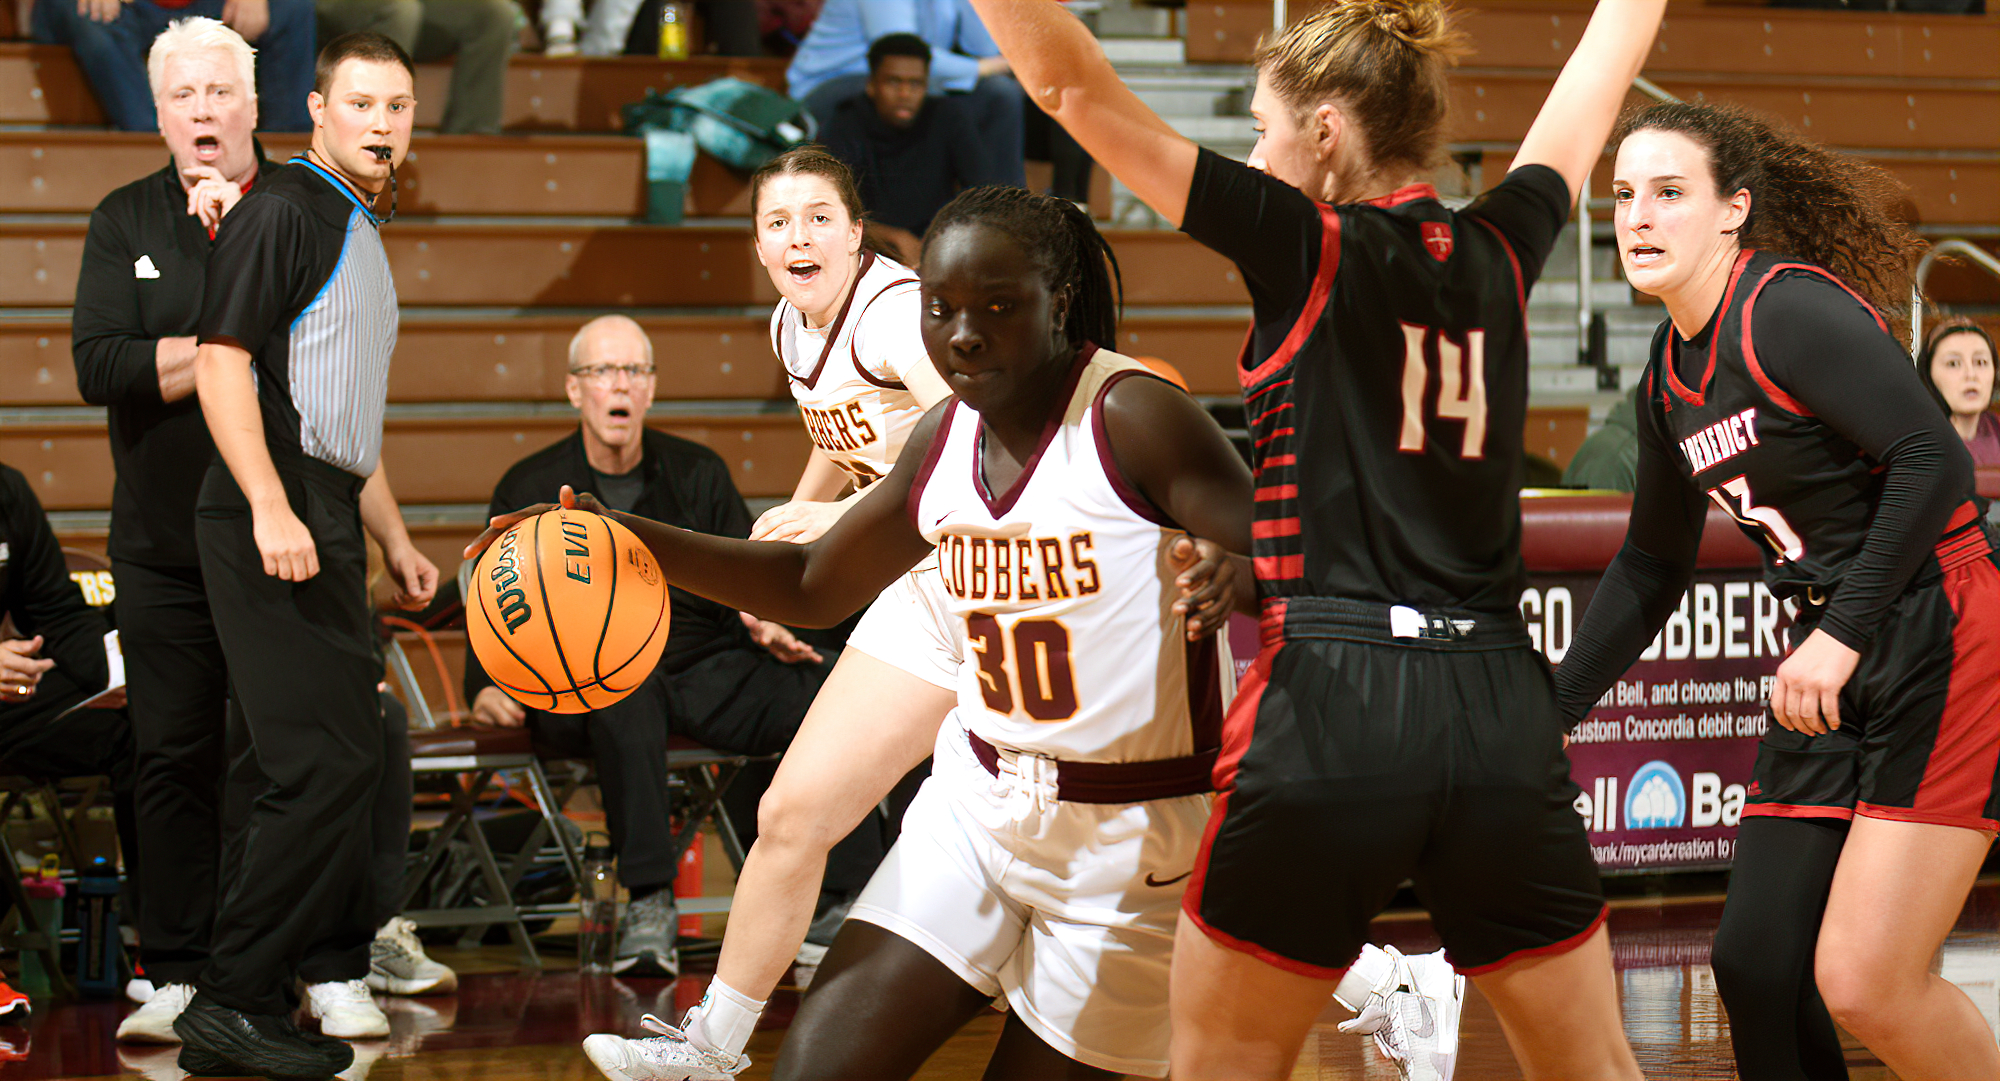 Senior Mary Sem drives to the basket during the first half of the Cobbers' come-from-behind win over St. Benedict.